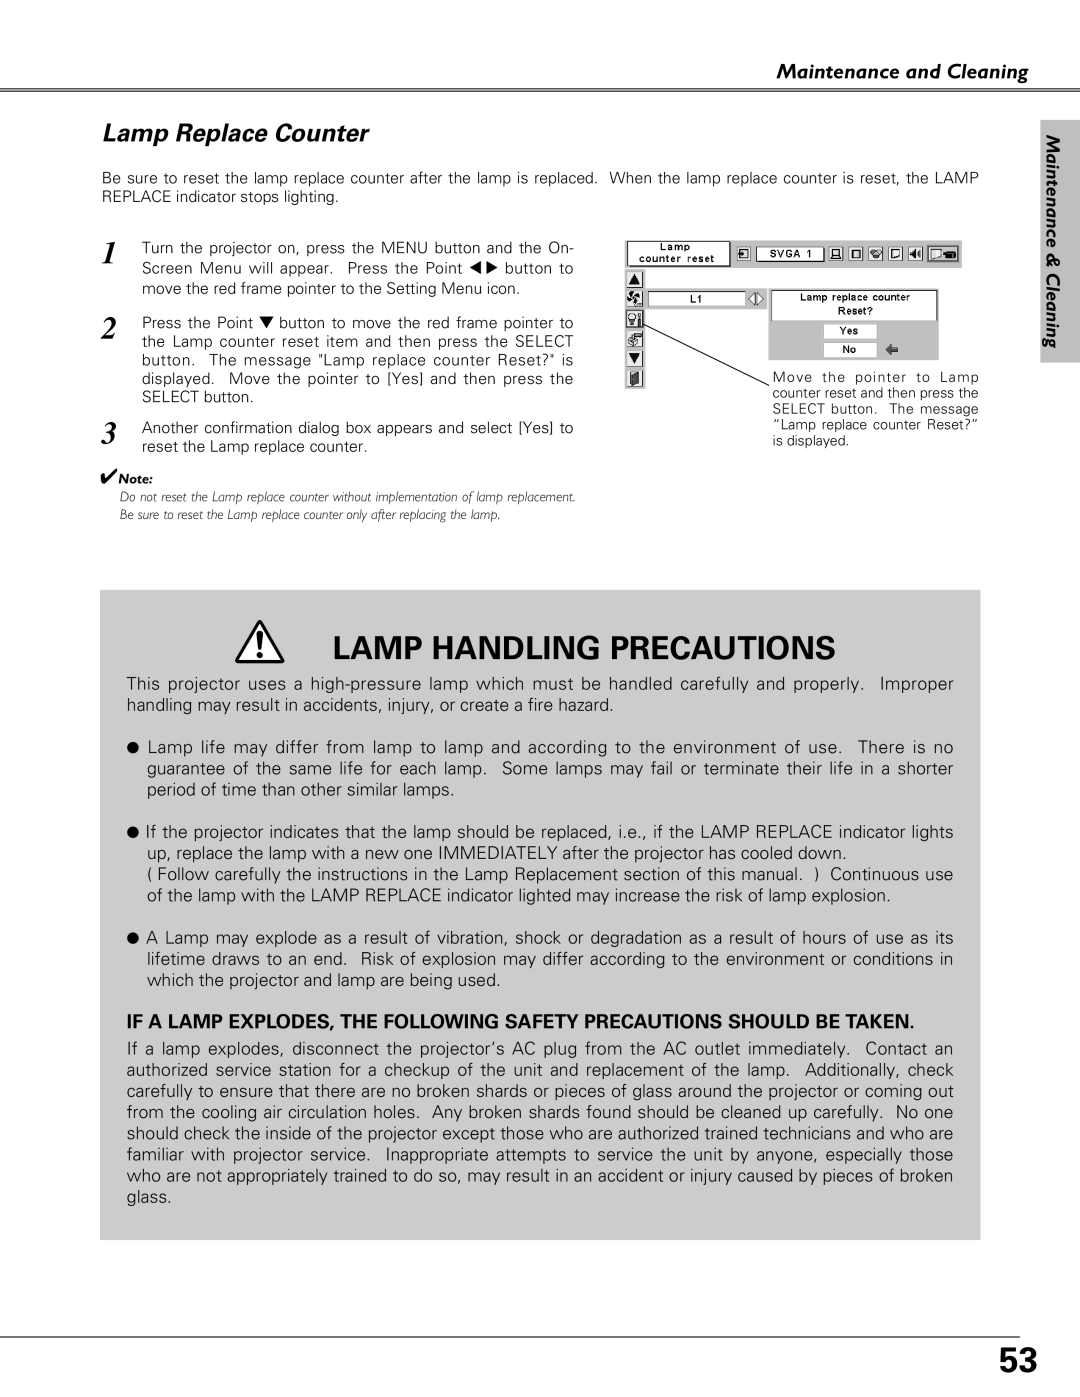 Eiki LC-SB21 owner manual Lamp Replace Counter, Lamp Handling Precautions, Maintenance and Cleaning 